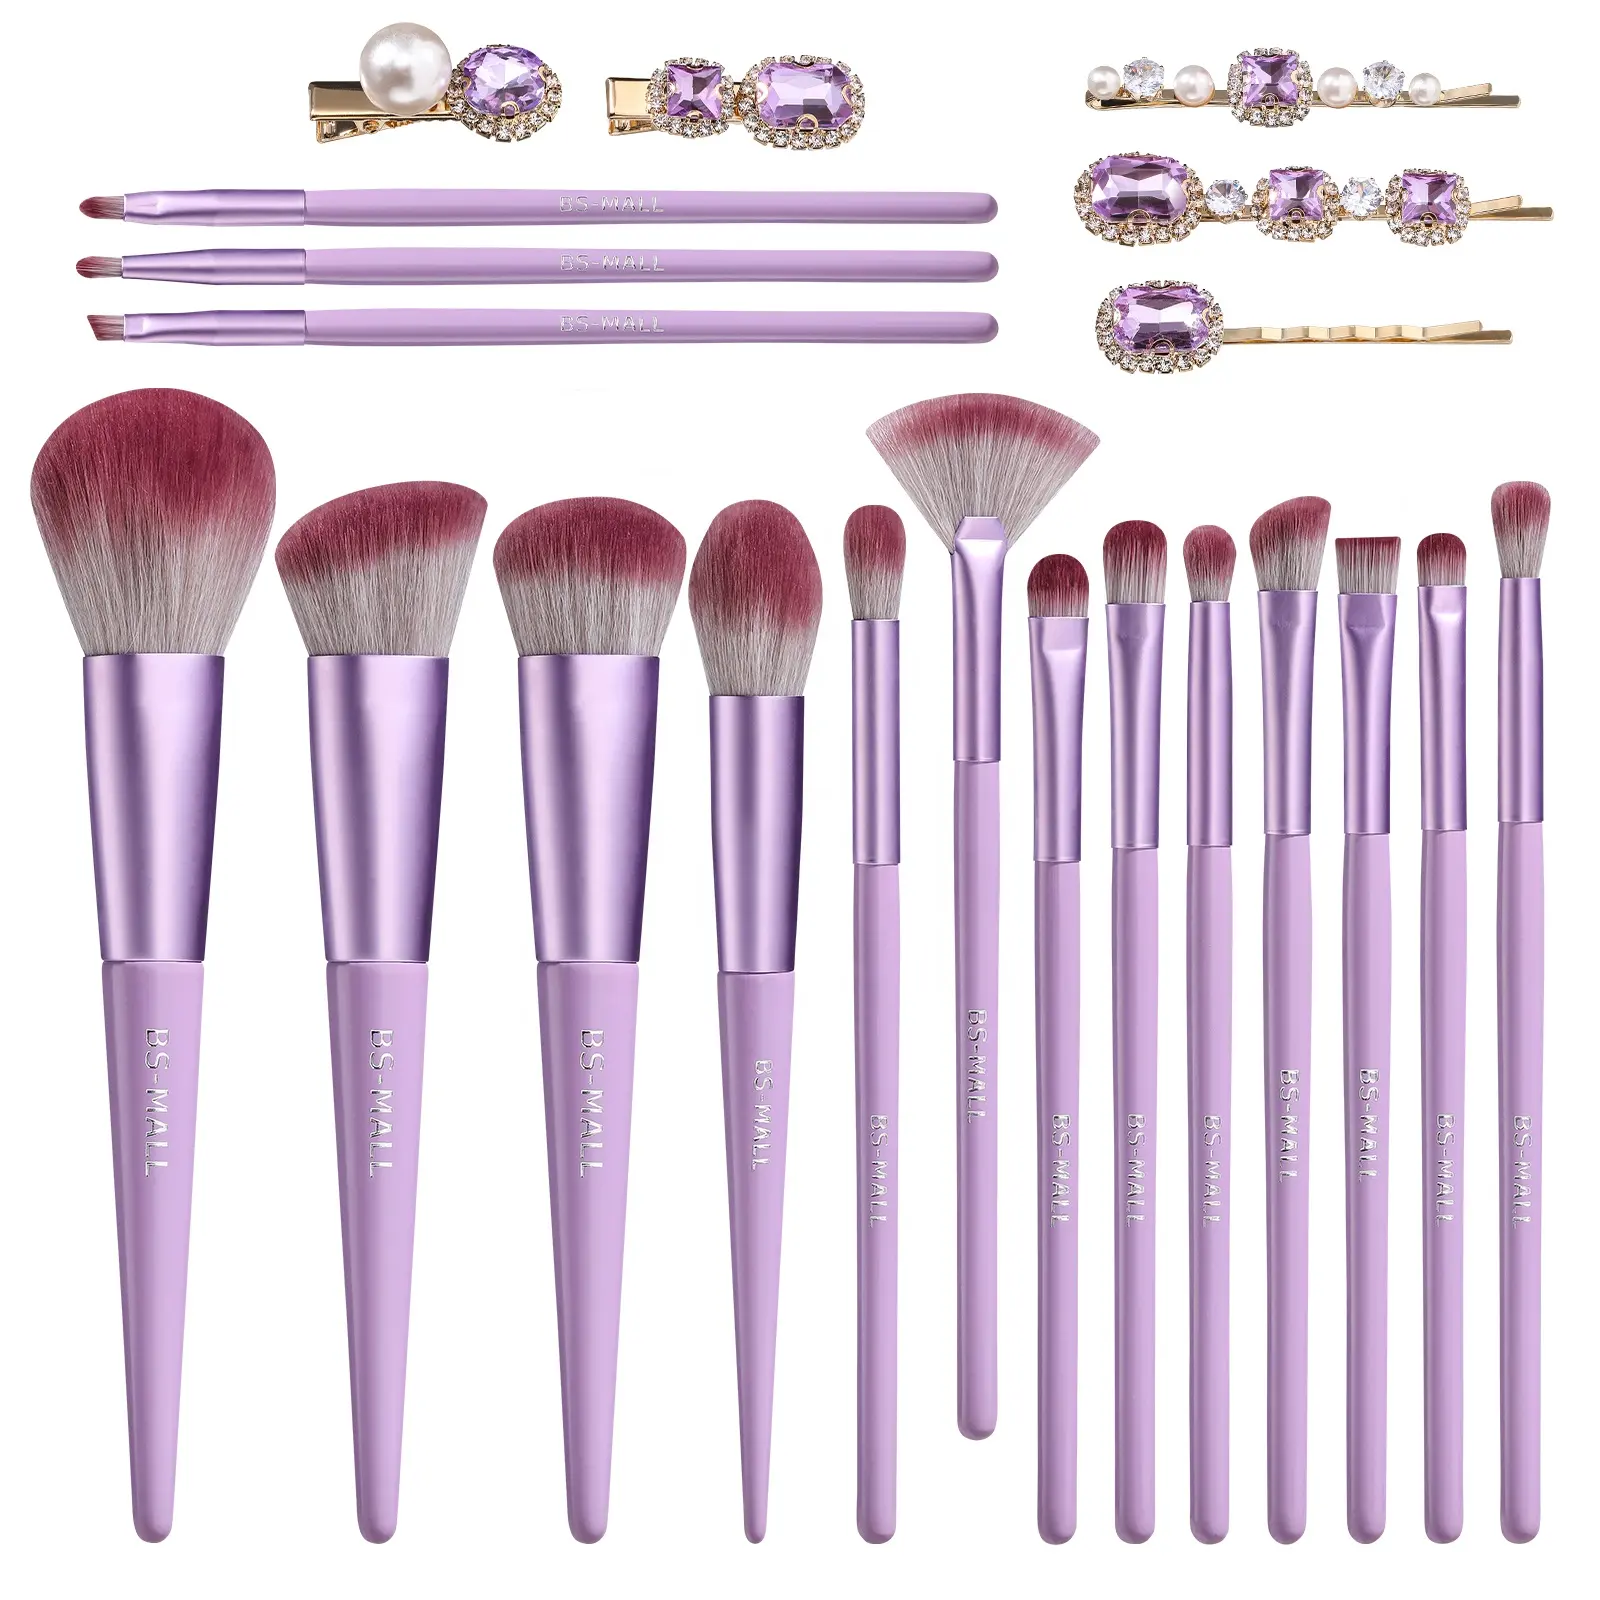 BS-MALL Professional Makeup Tools Kits Private Label 16 Piece Quality Makeup Brush Crystal Rhinestone Hair Pin Kit